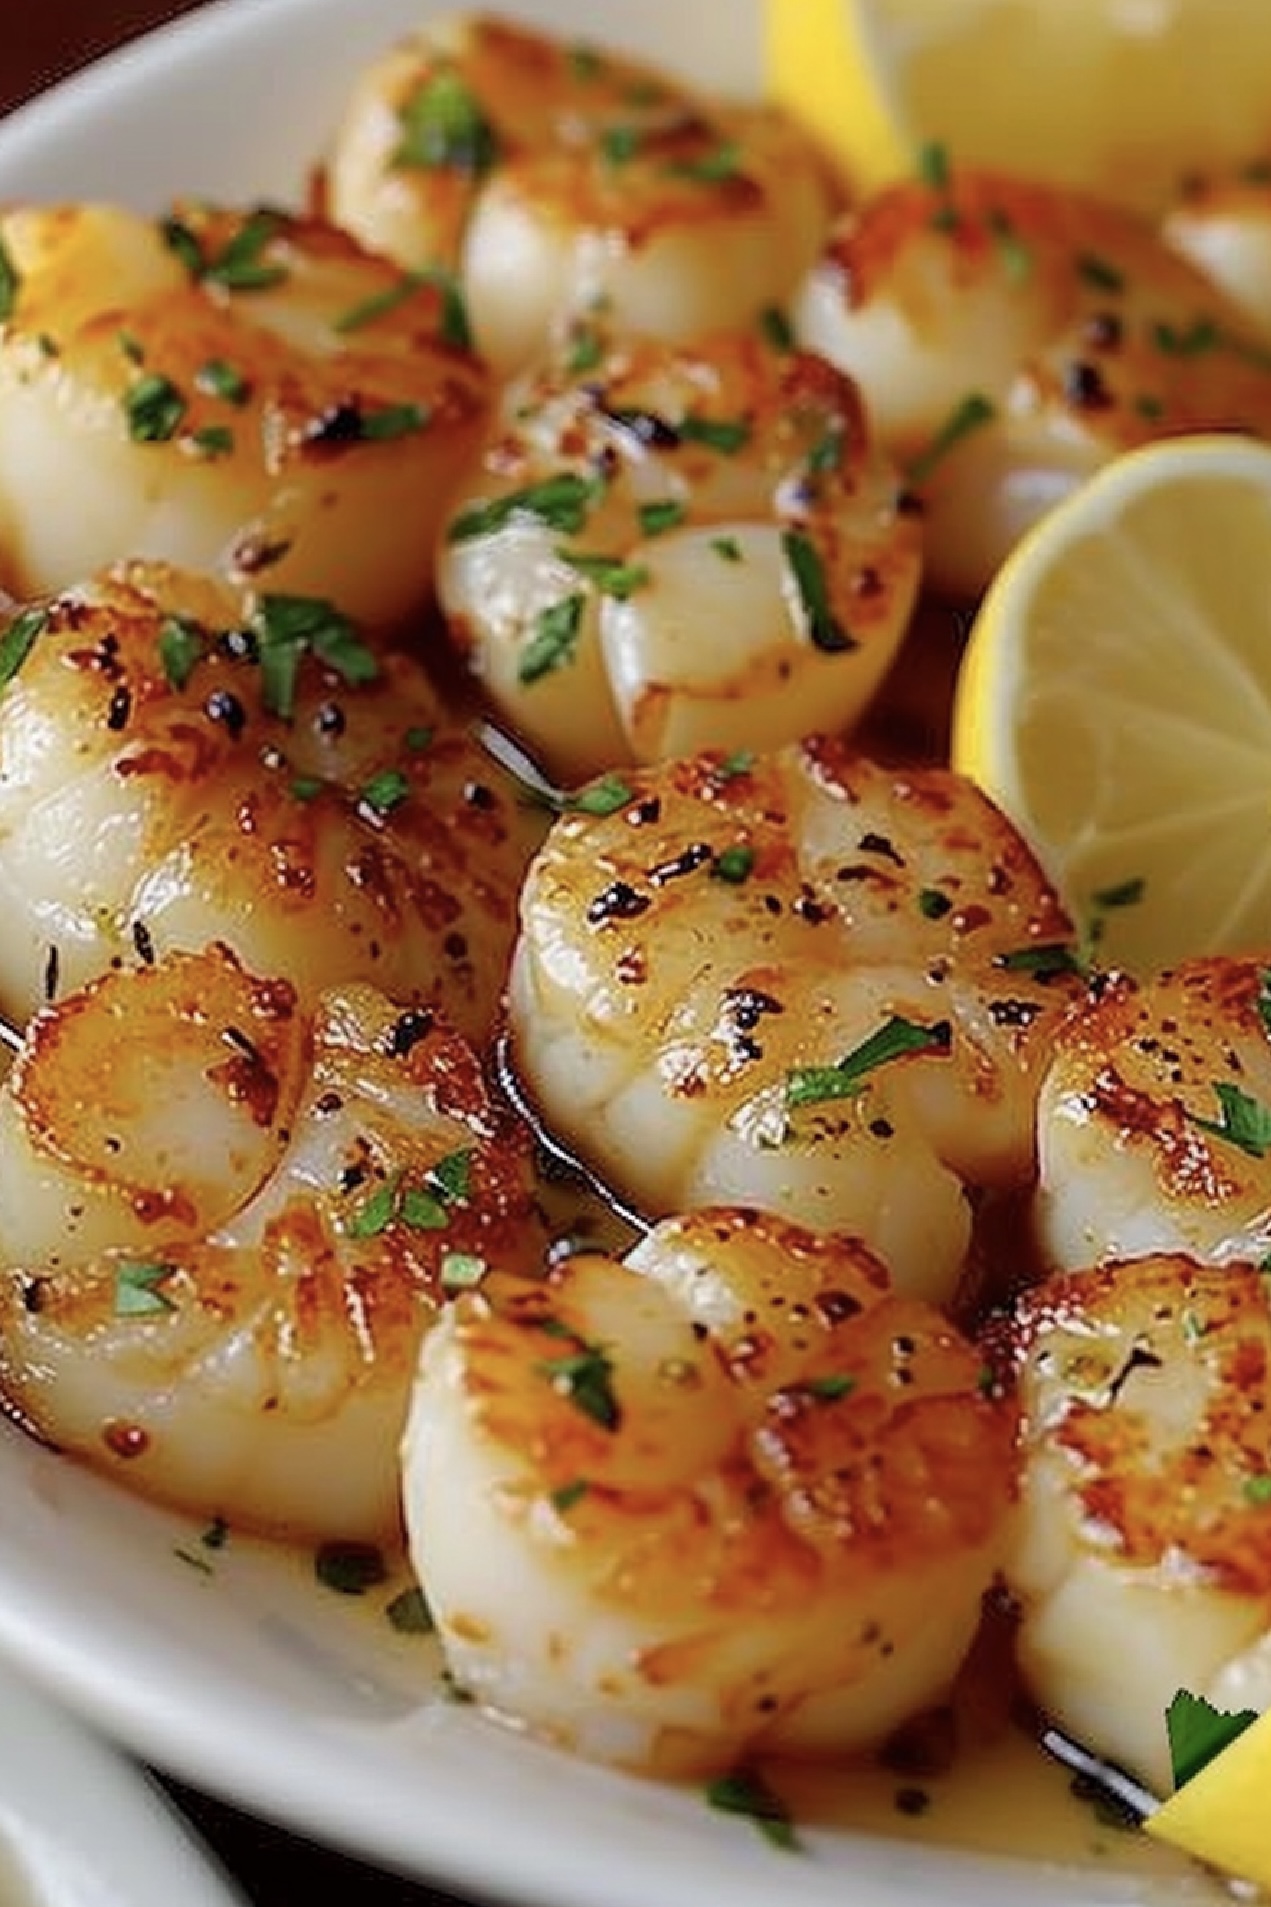 Need a quick yet elegant dinner idea? Try our Broiled Scallops recipe and indulge in a taste of gourmet luxury at home.